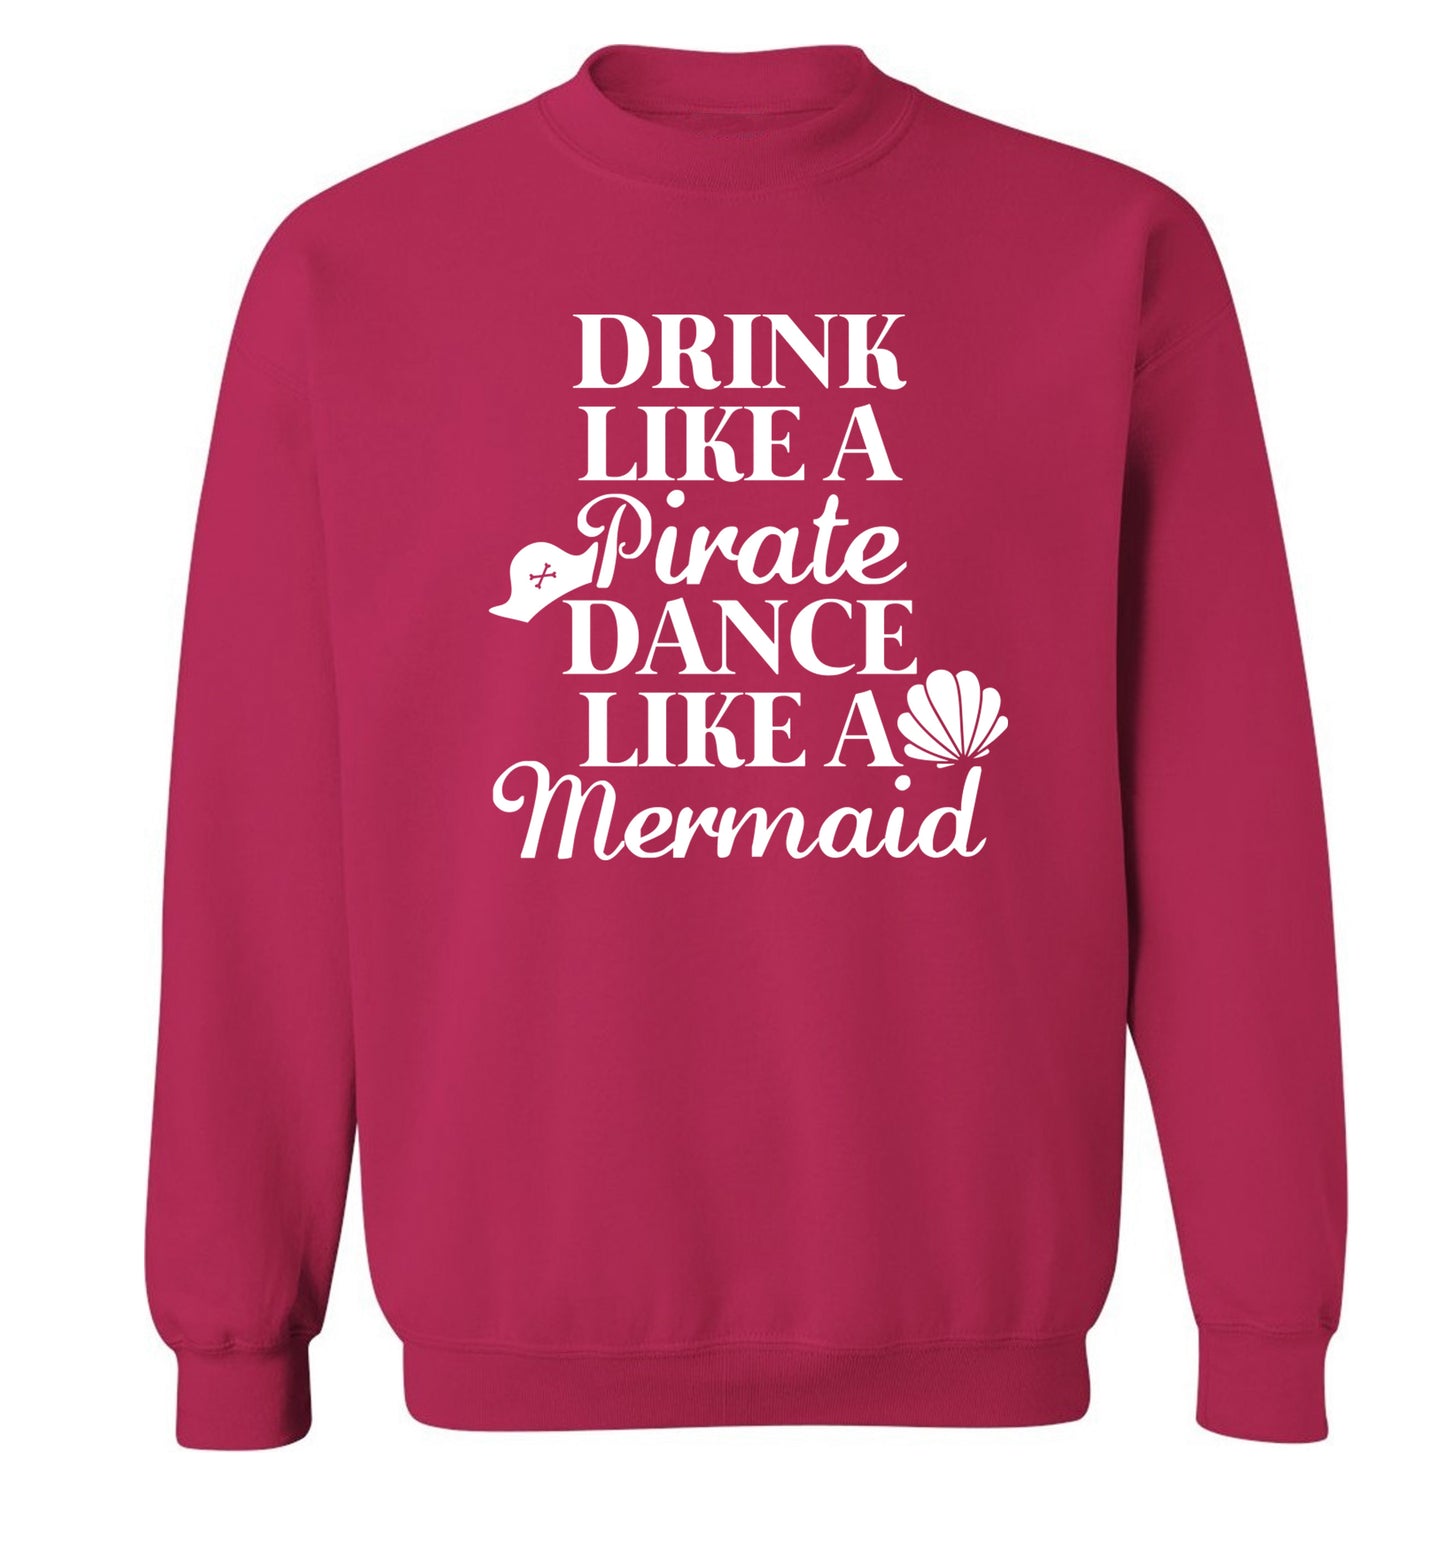 Drink like a pirate dance like a mermaid Adult's unisex pink Sweater 2XL